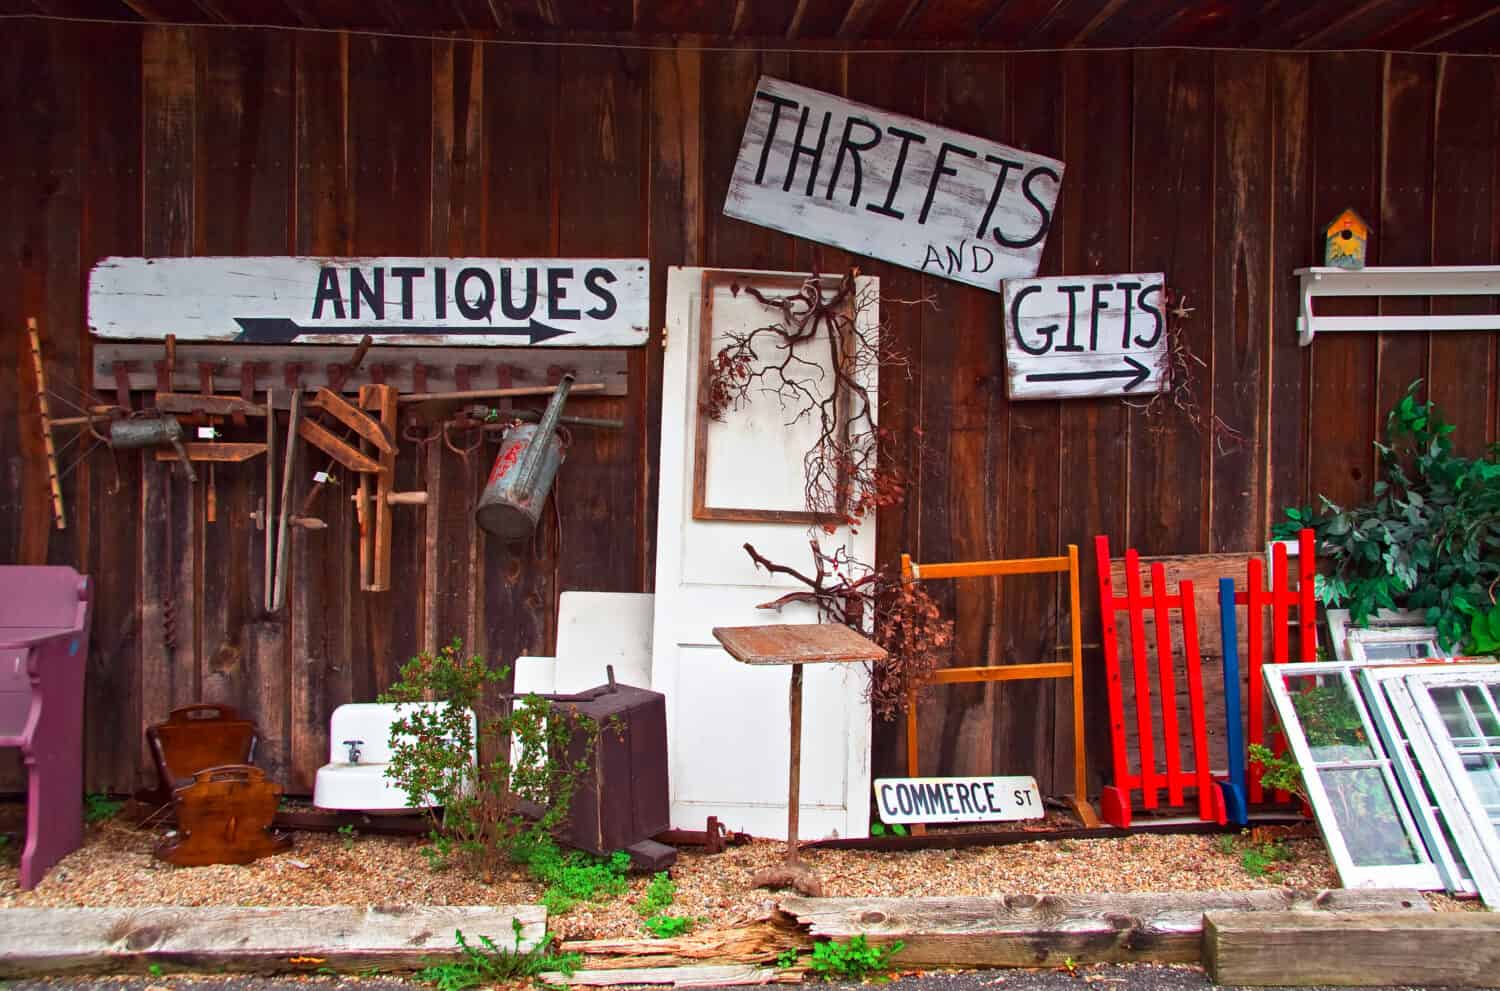 View of antiques thrift store with various items displayed.